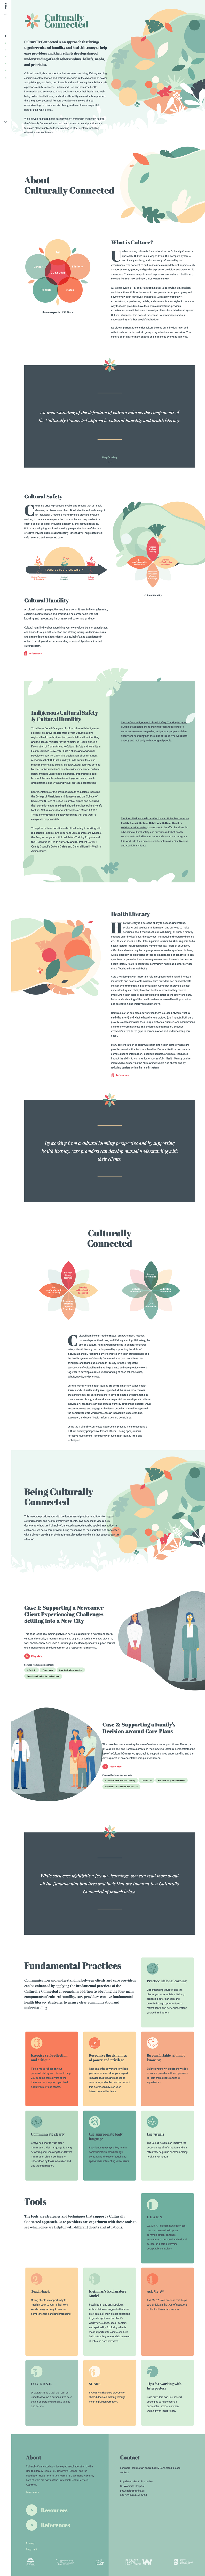 Culturally Connected Landing Page Example: Culturally Connected is an approach that brings together cultural humility and health literacy to help care providers and their clients develop shared understanding of each other's values, beliefs, needs, and priorities.